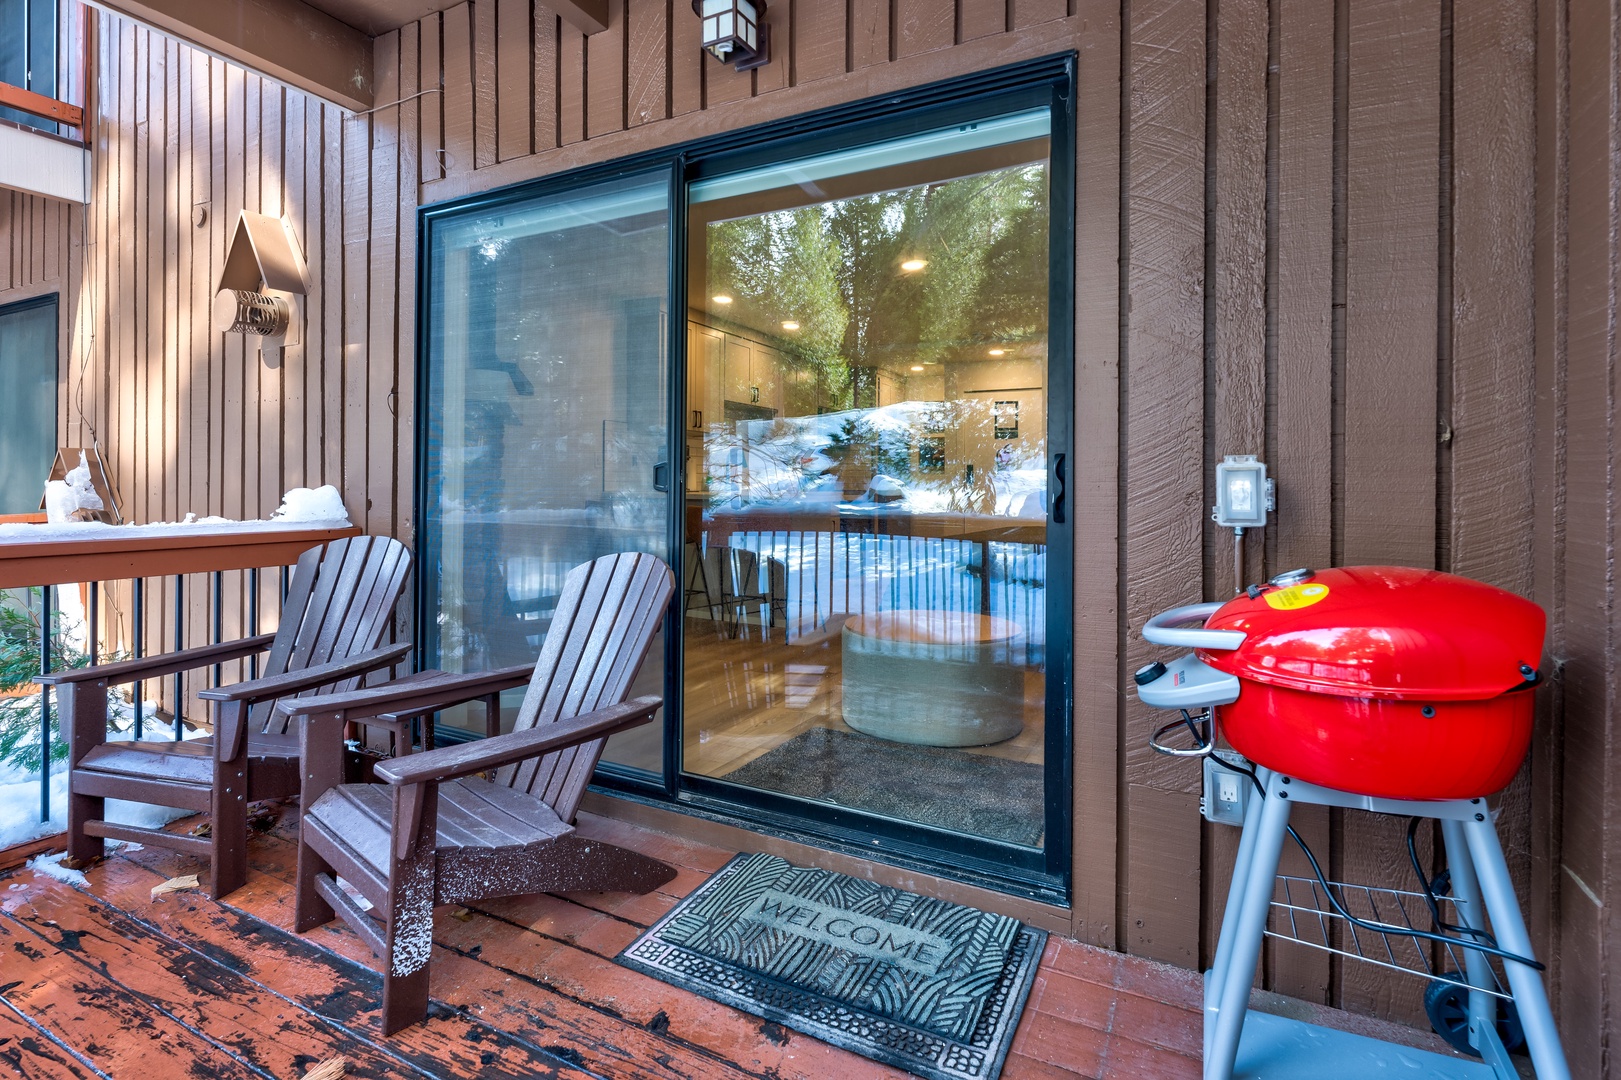 Private deck with outdoor seating and grill